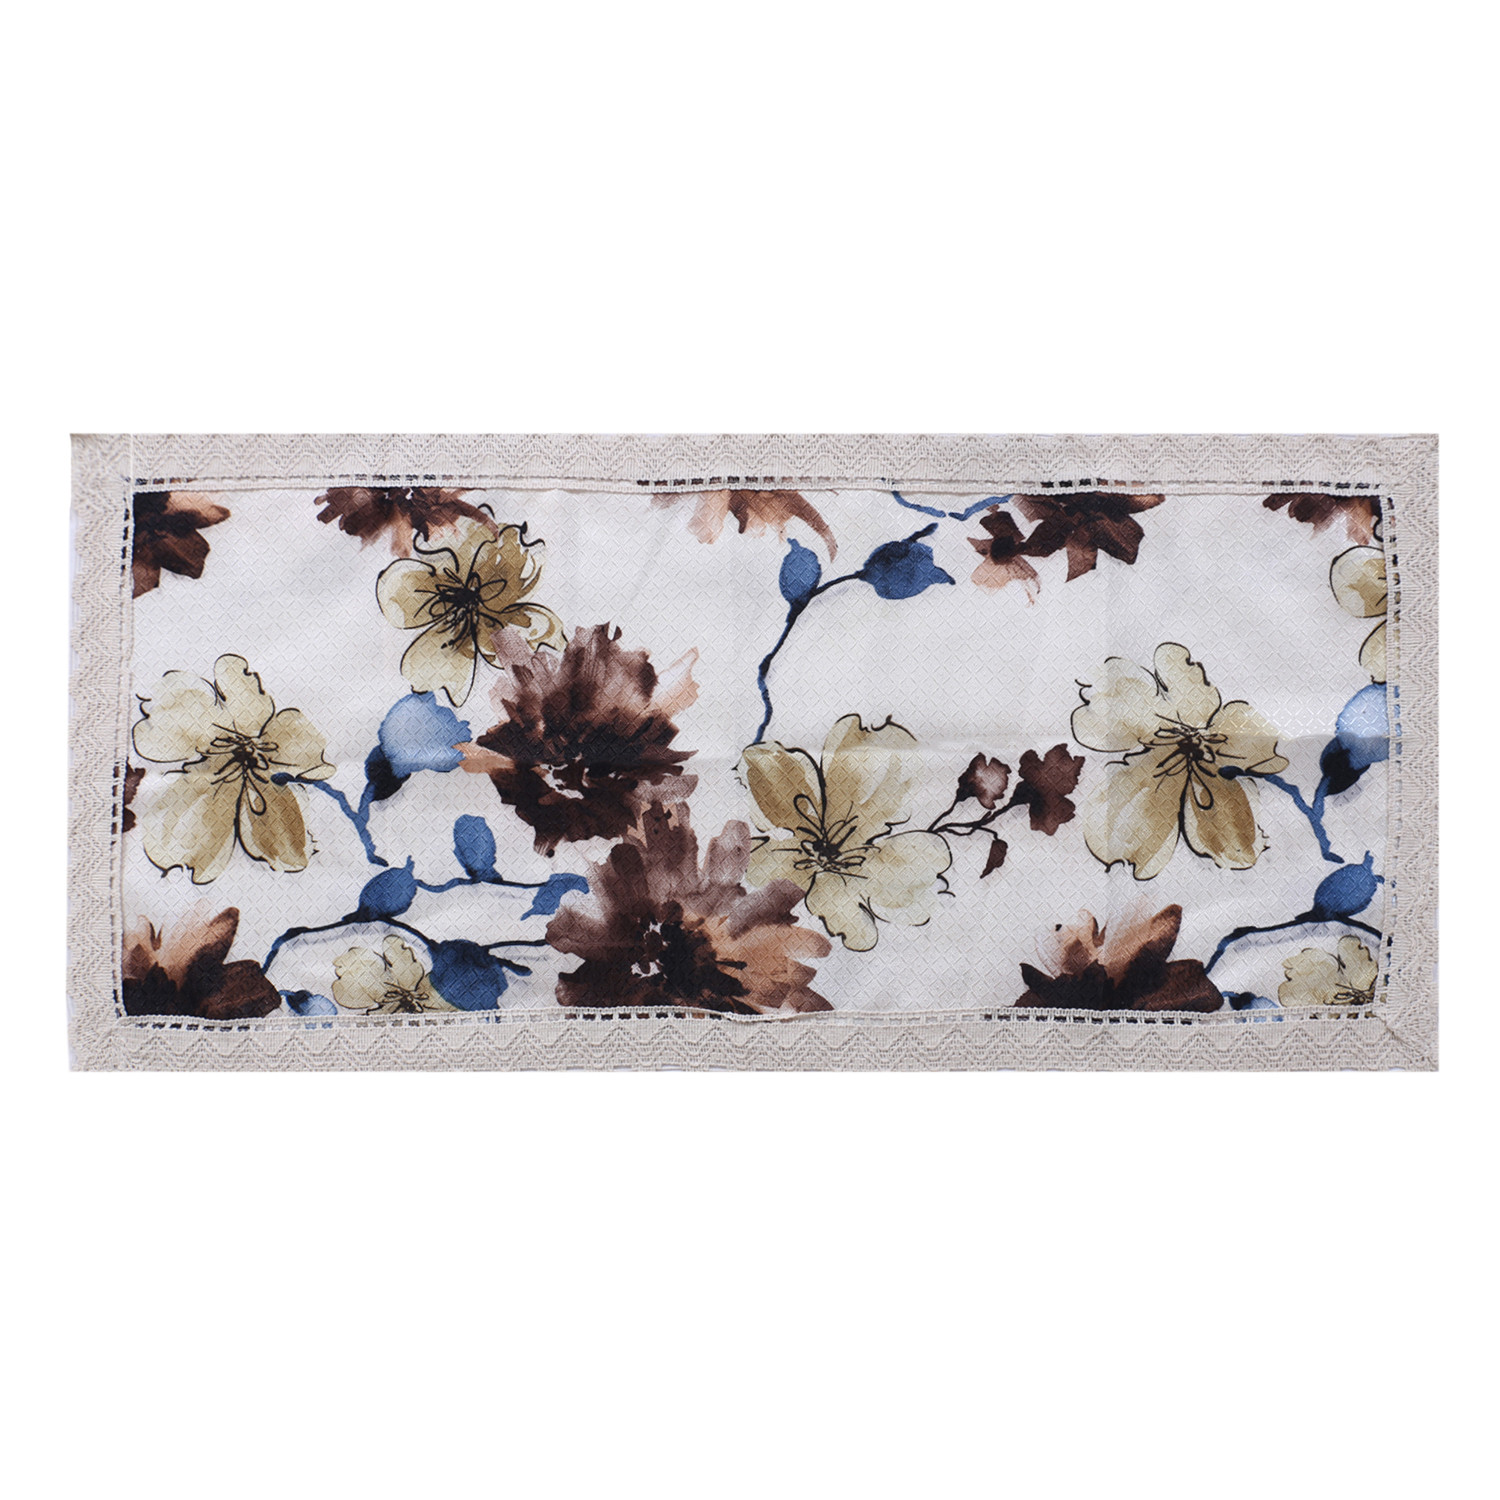 Kuber Industries Table Runner|Poly Cotton Decorative Floral Pattern|Tea Table Runner for Everyday Use With Jutelace Border, 34x16 Inch (Cream)